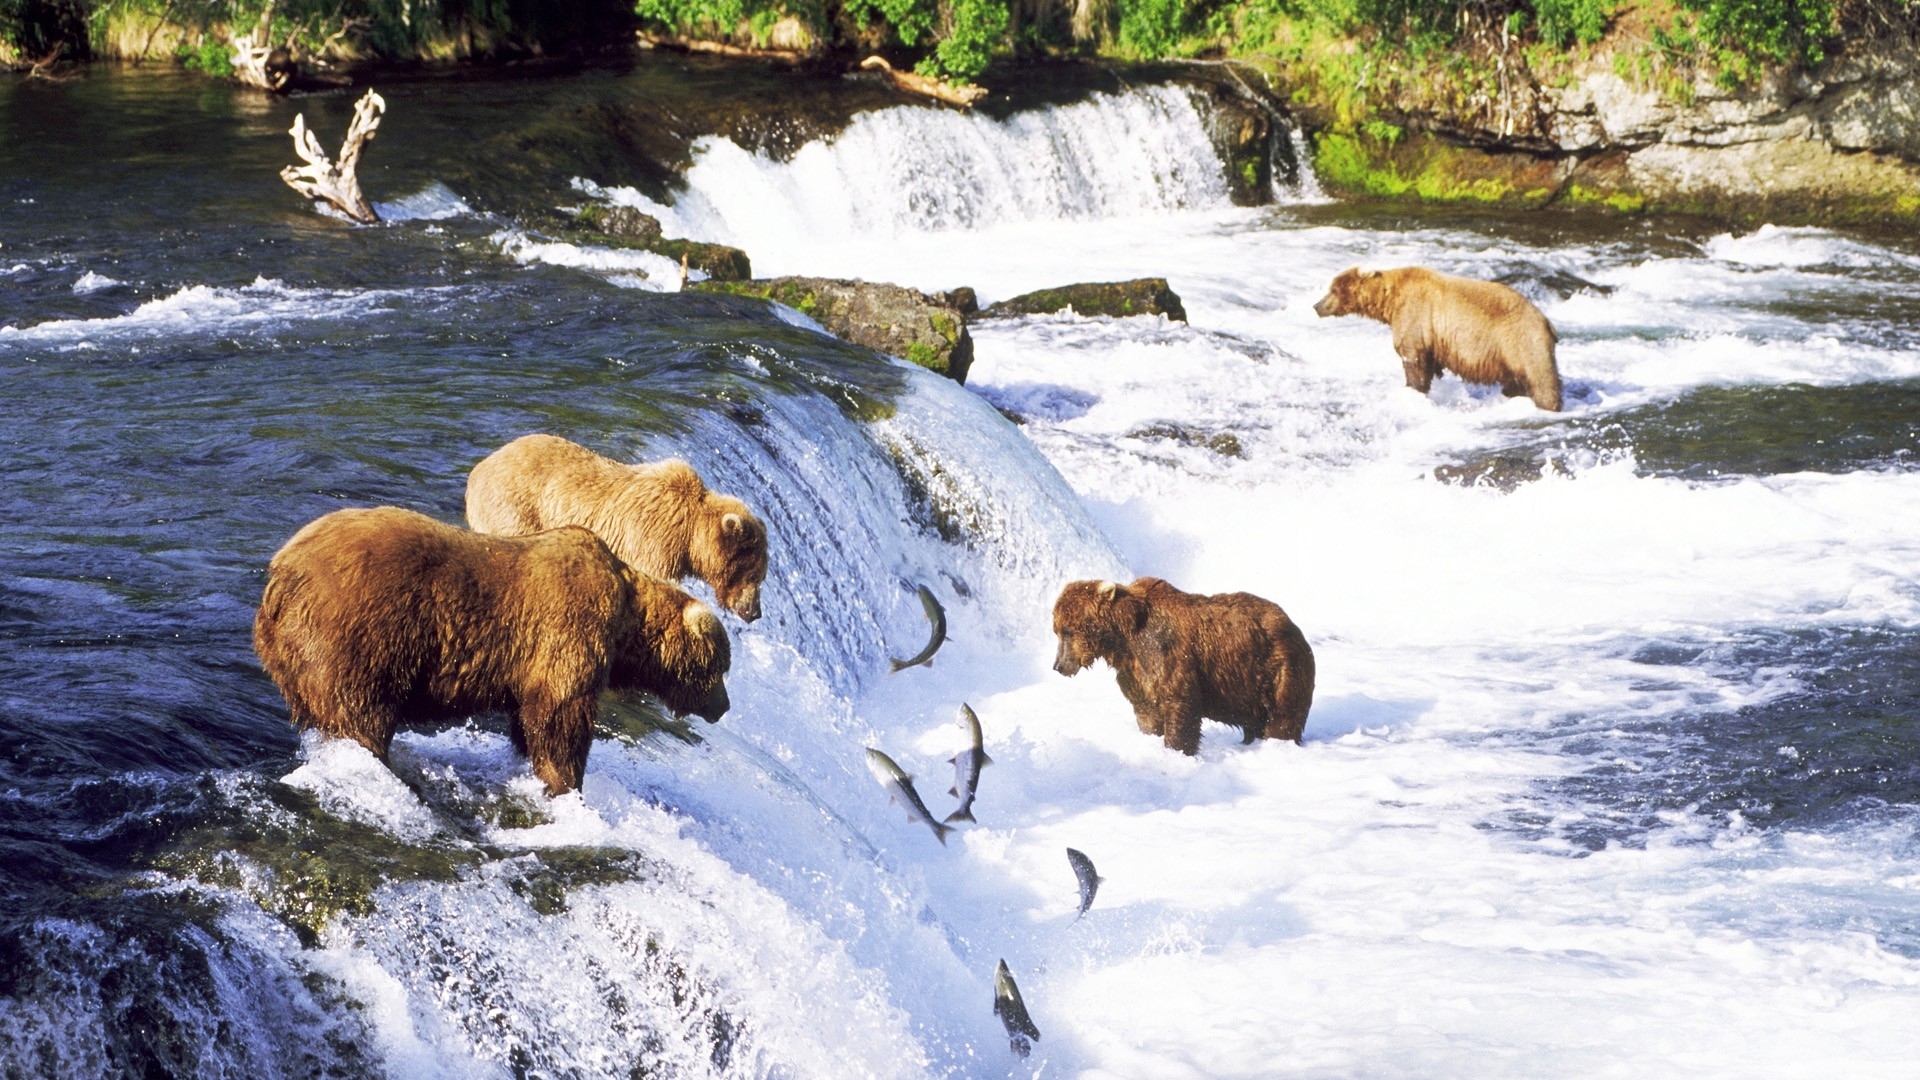 Grizzly Bears Alaska Fishes Salmon Rivers Nature Wallpaper